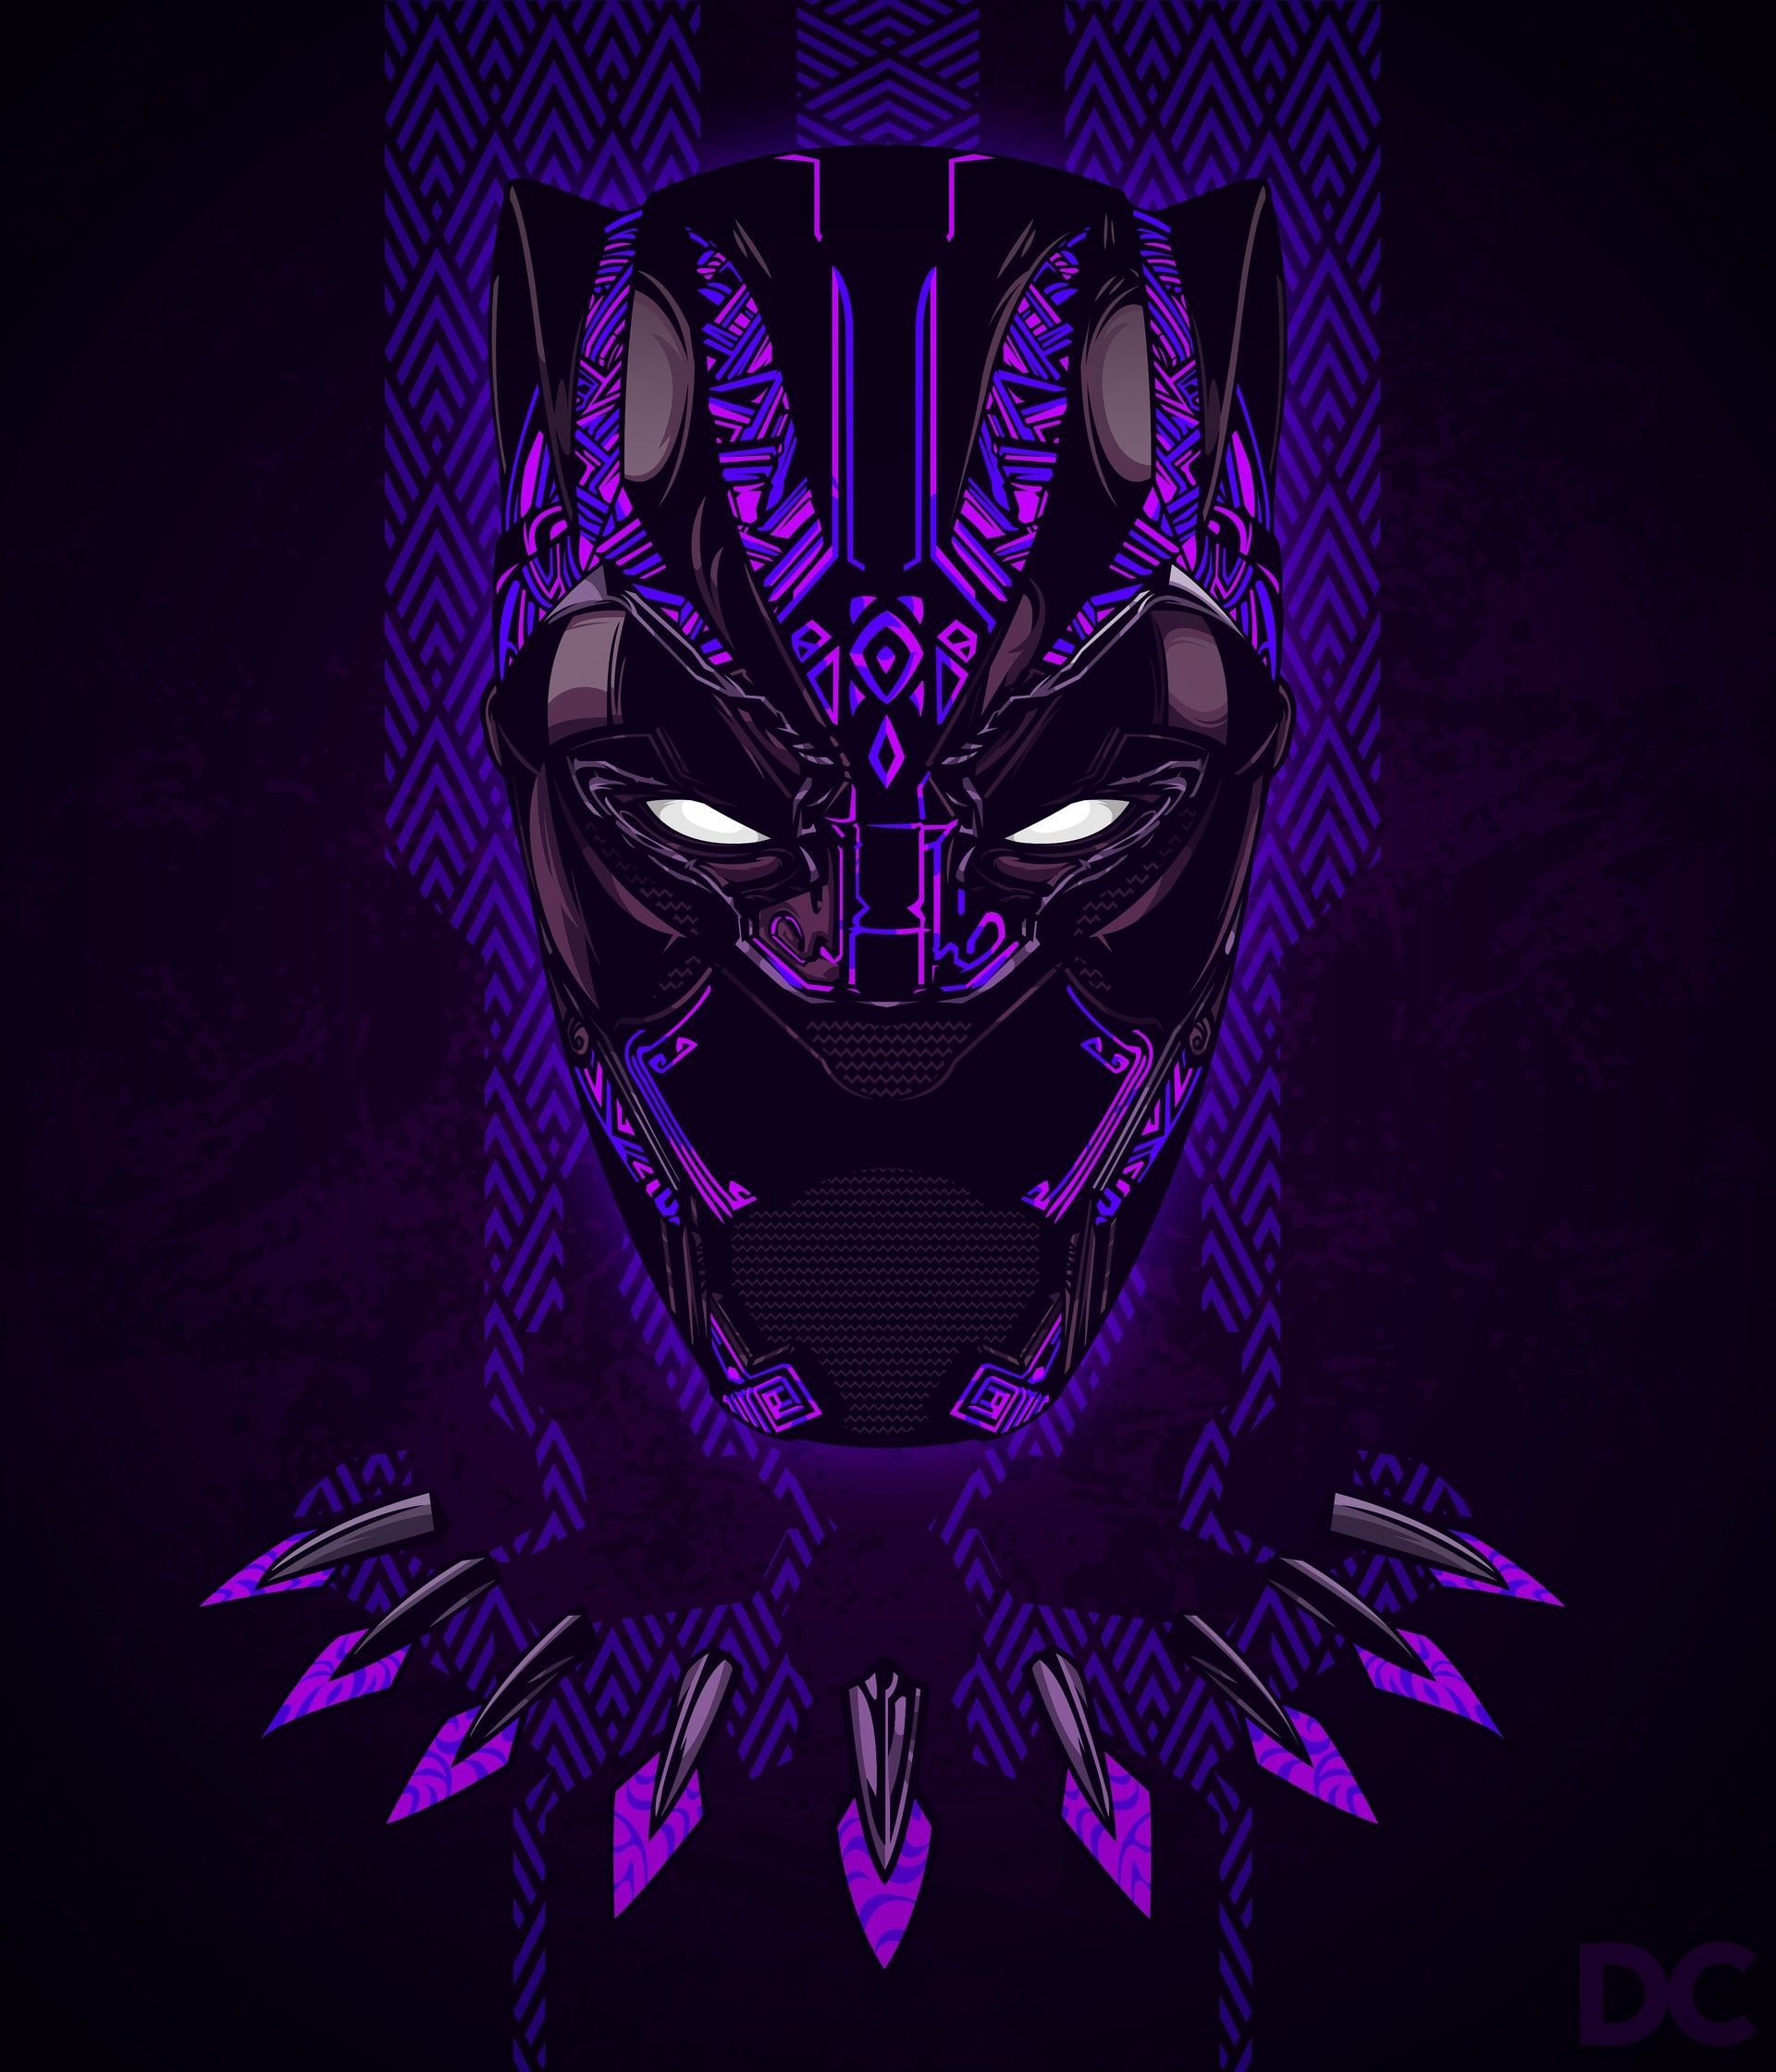 Black Panther T'CHALLA (by: Duanne Gerard Carandang (cdna.artstation.com) Submitted By: Lol33ta). Black Panther Art, Black Panther, Black Panther Marvel